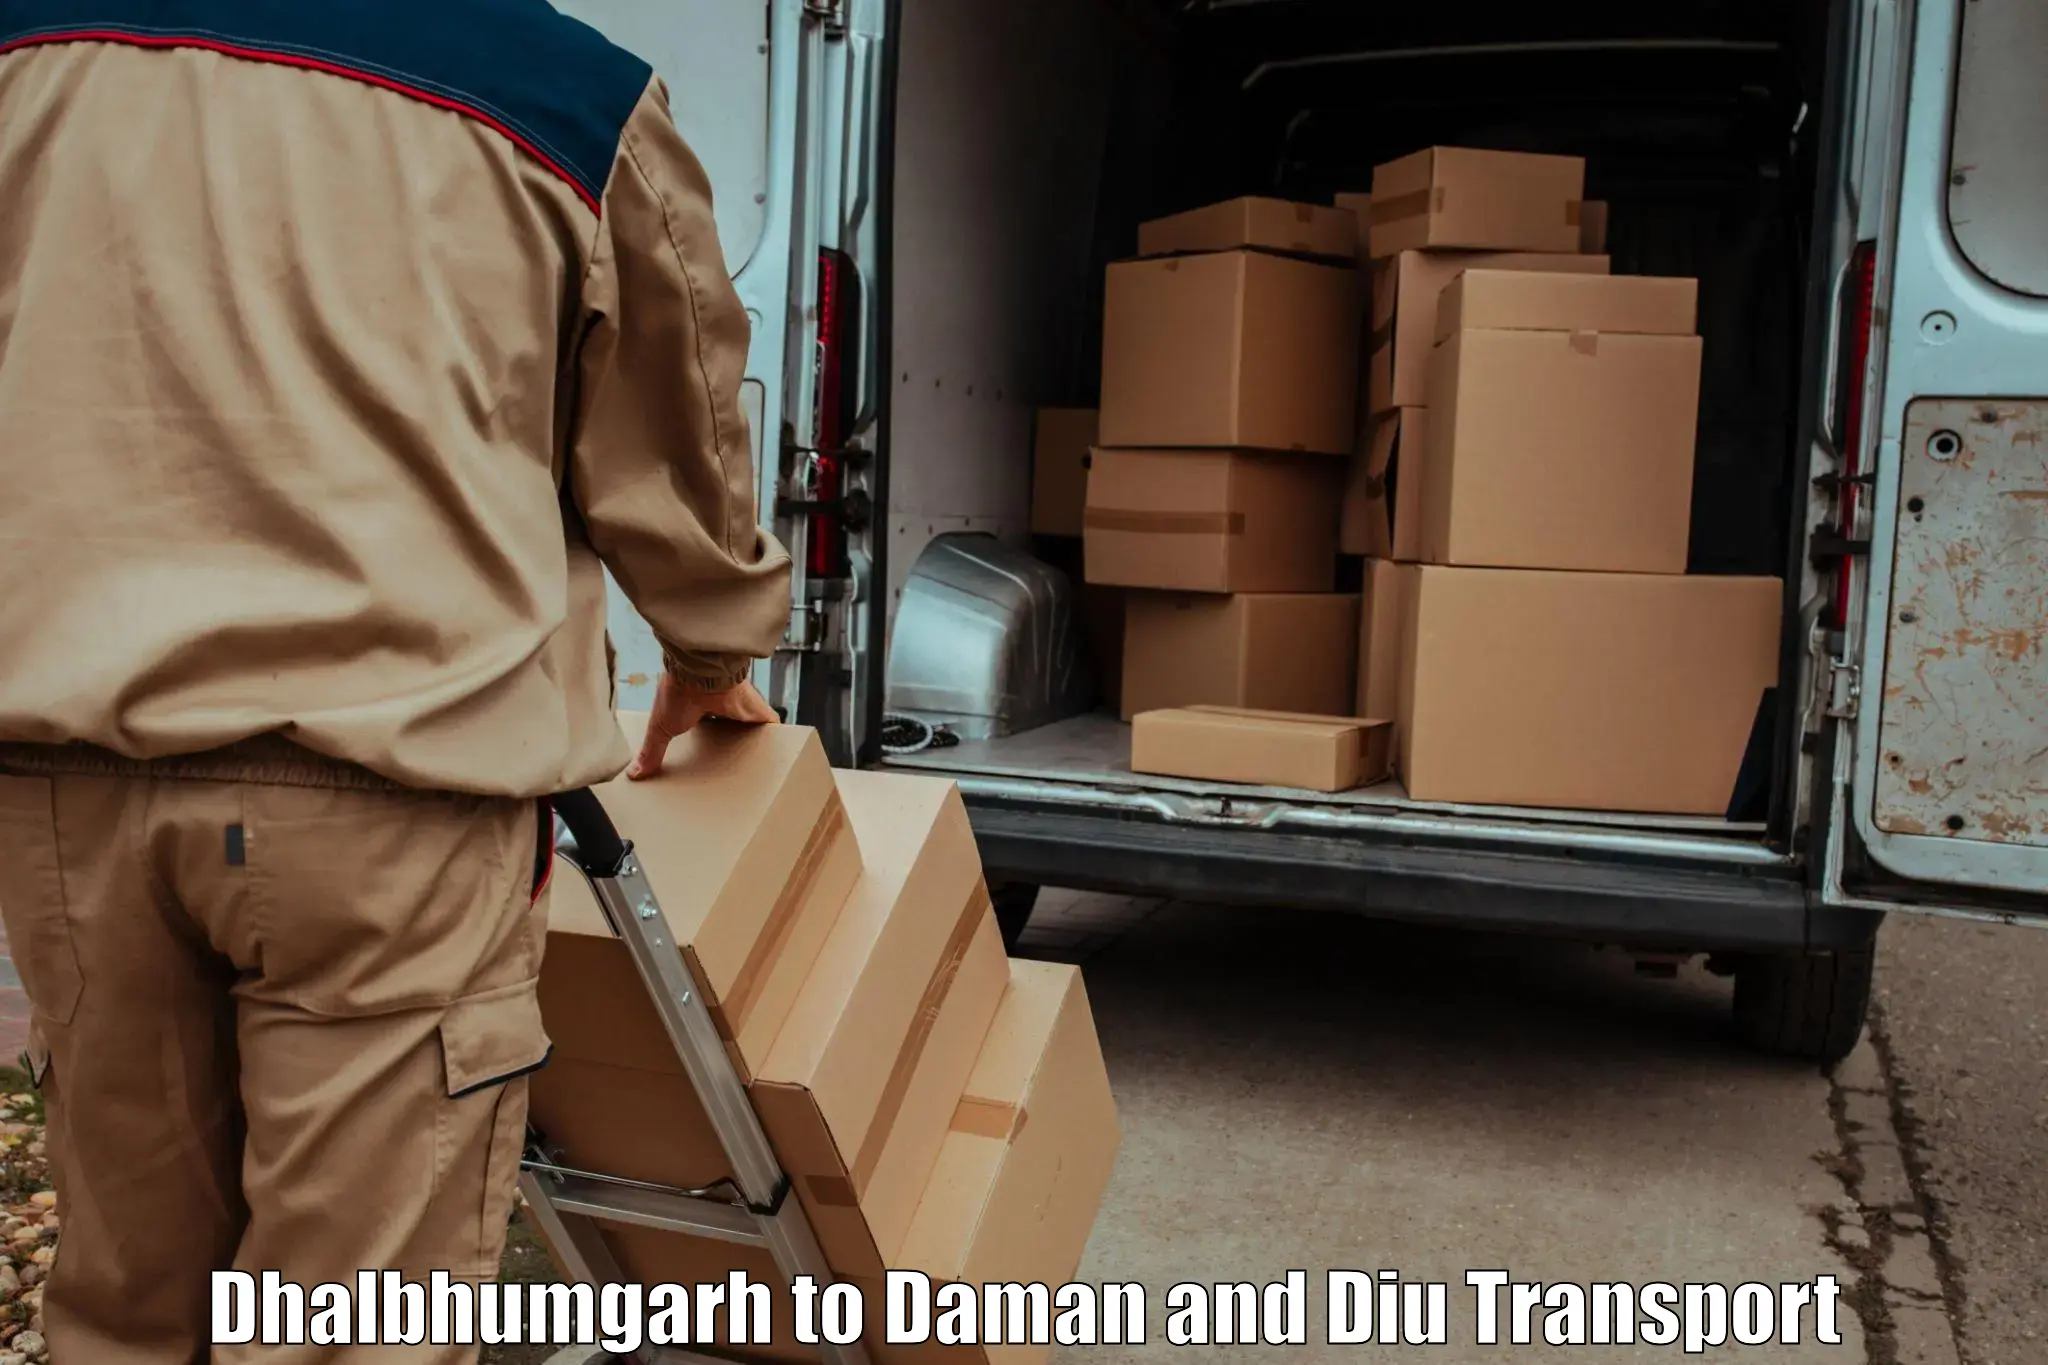 Container transportation services Dhalbhumgarh to Daman and Diu